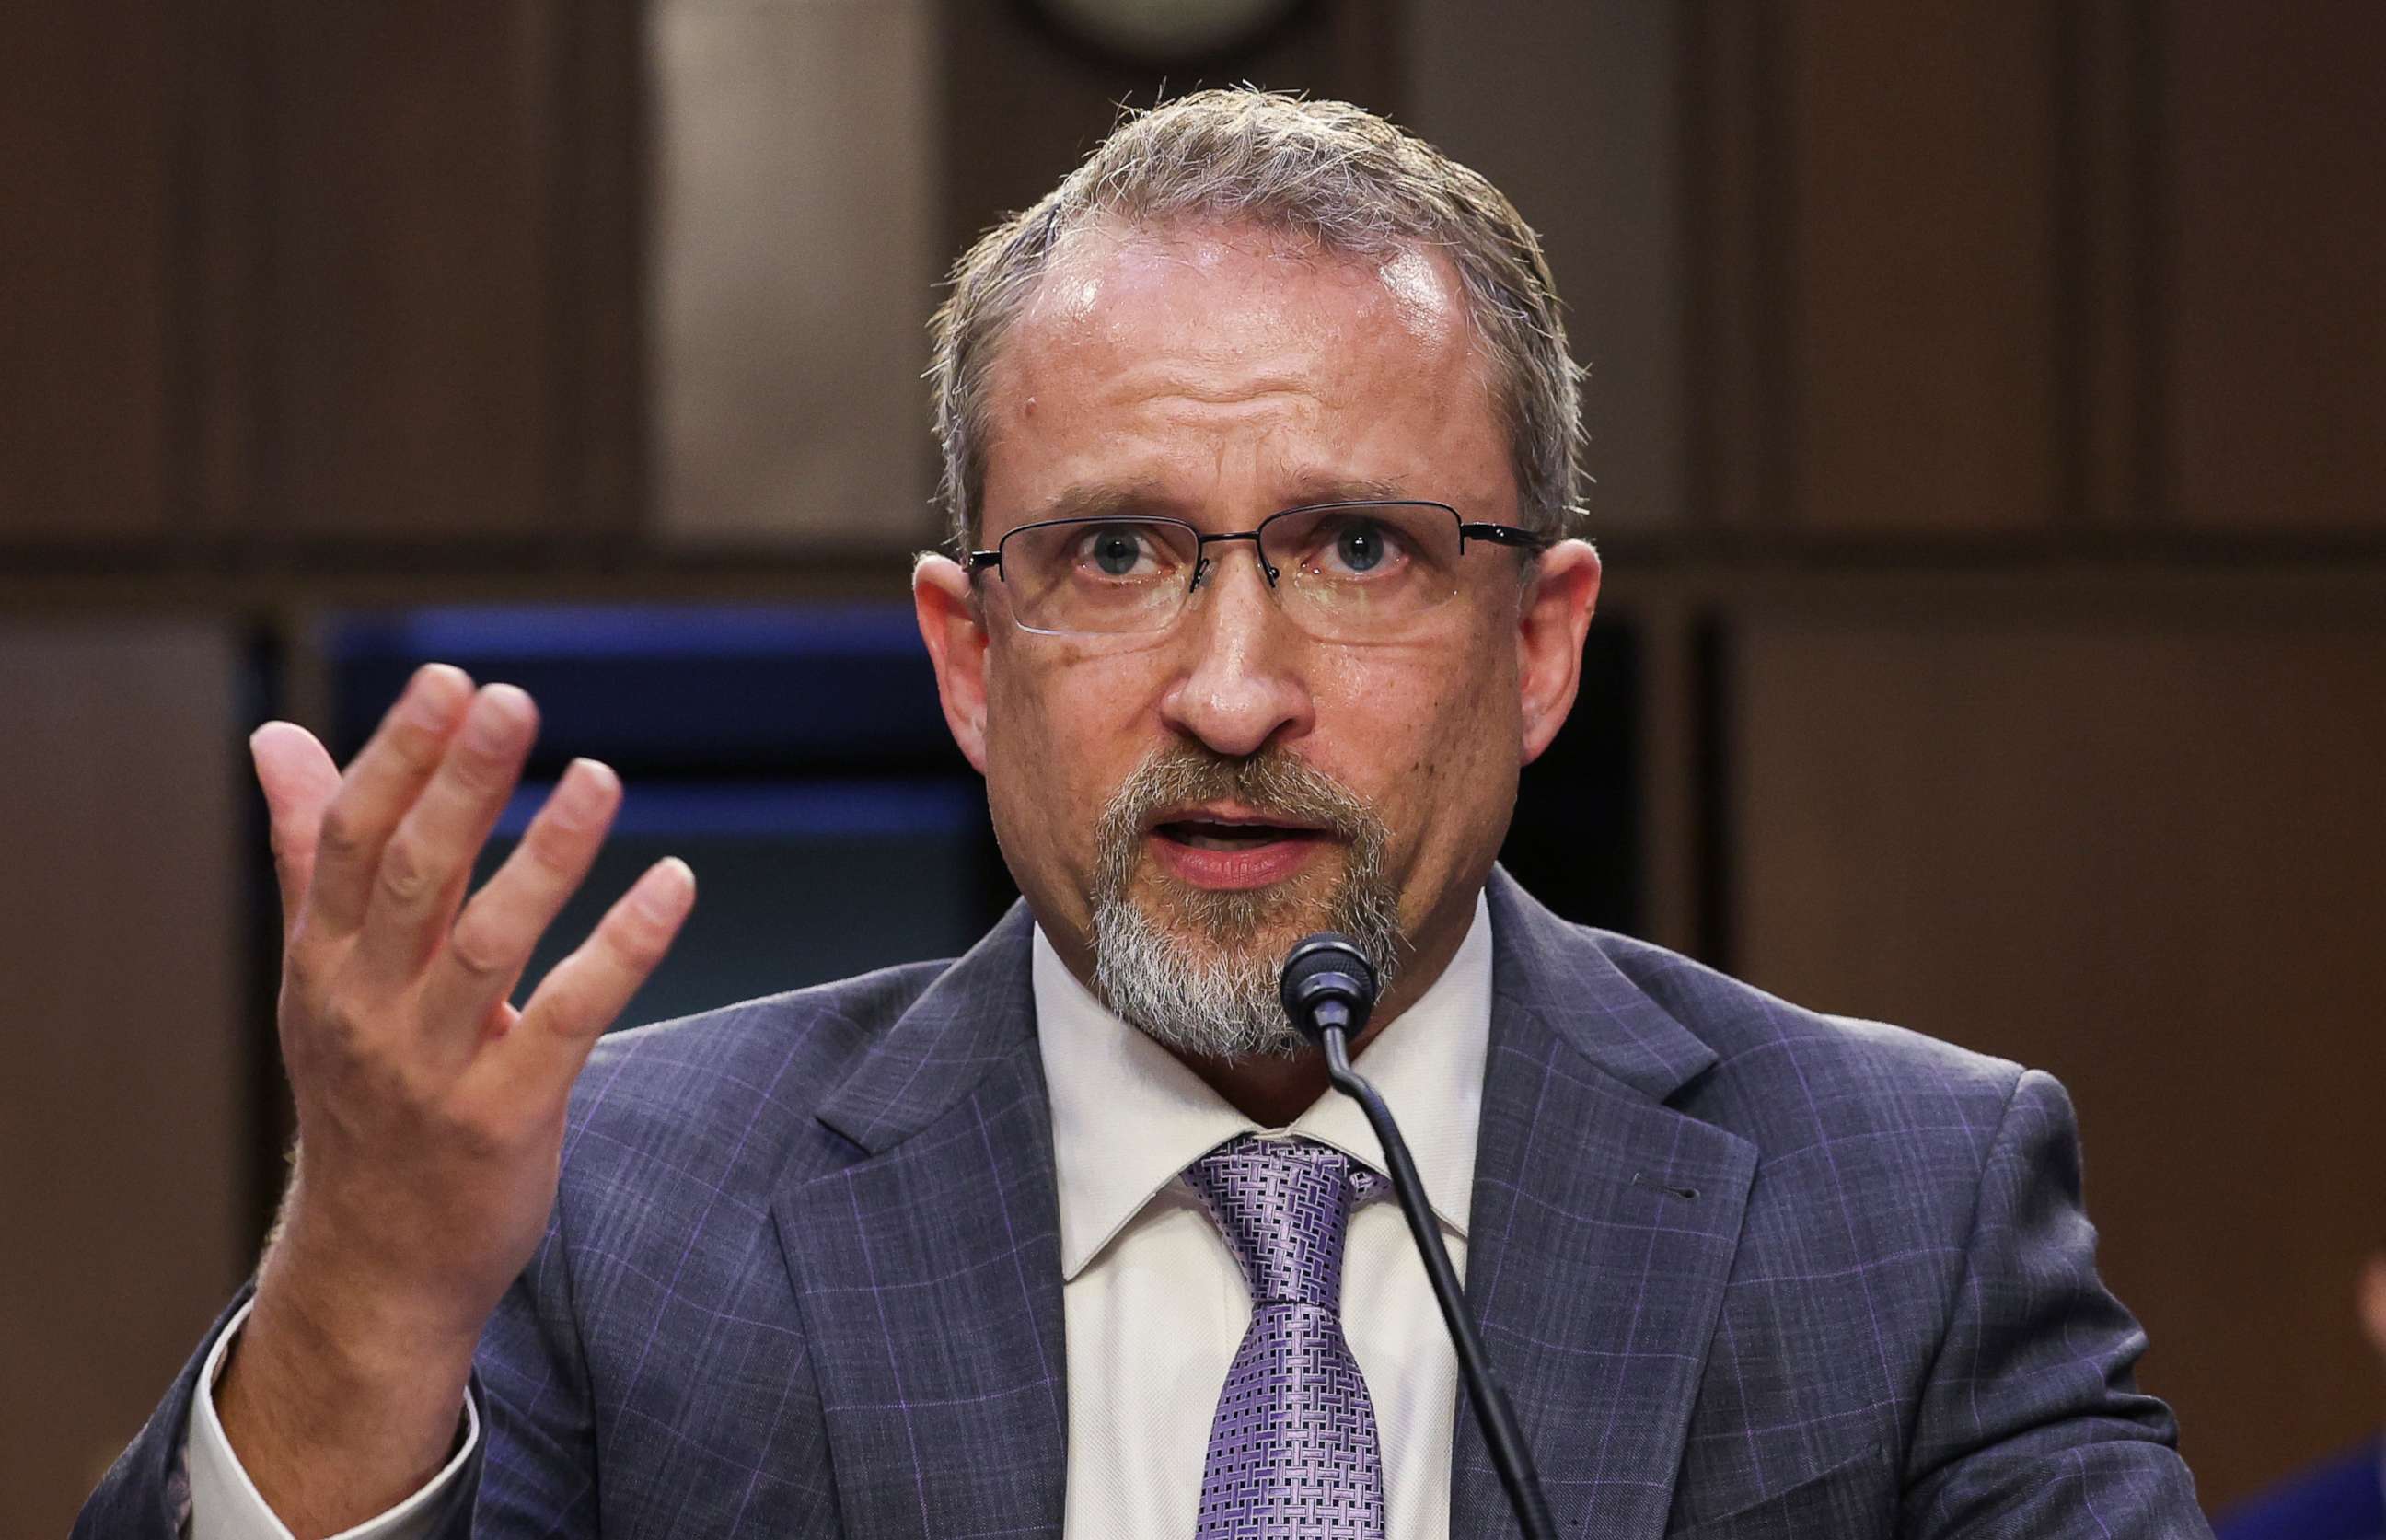 PHOTO:  Peiter "Mudge" Zatko, former head of security at Twitter, testifies before the Senate Judiciary Committee on data security at Twitter, on Capitol Hill, Sept. 13, 2022 in Washington, D.C.